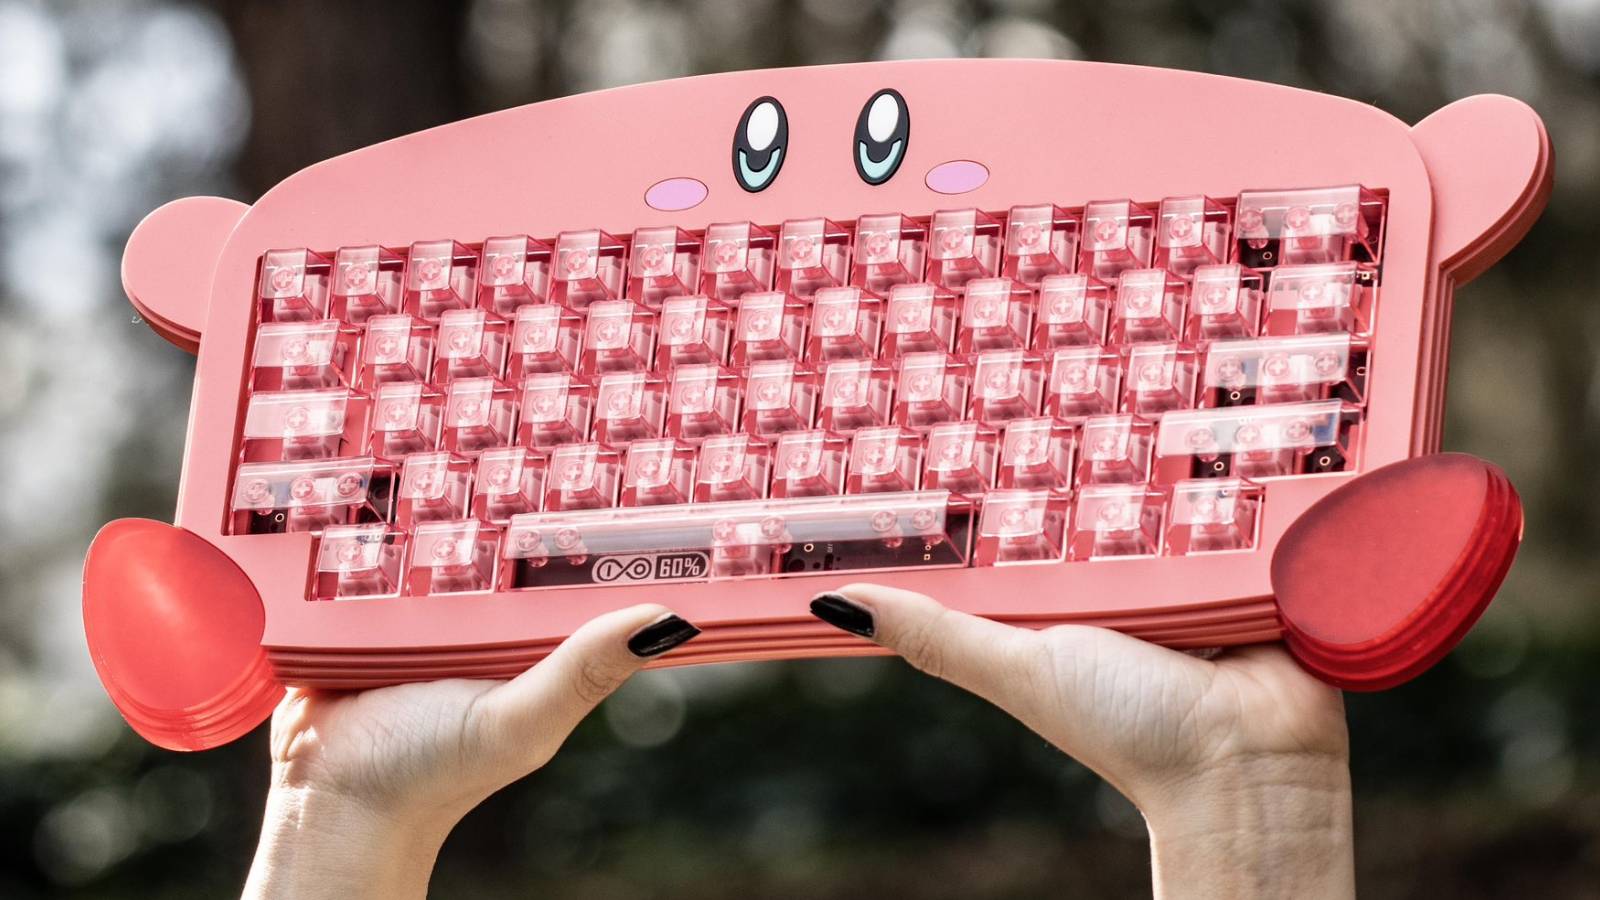 Image of the 'Creampuff' custom keyboard built by Qlavier.